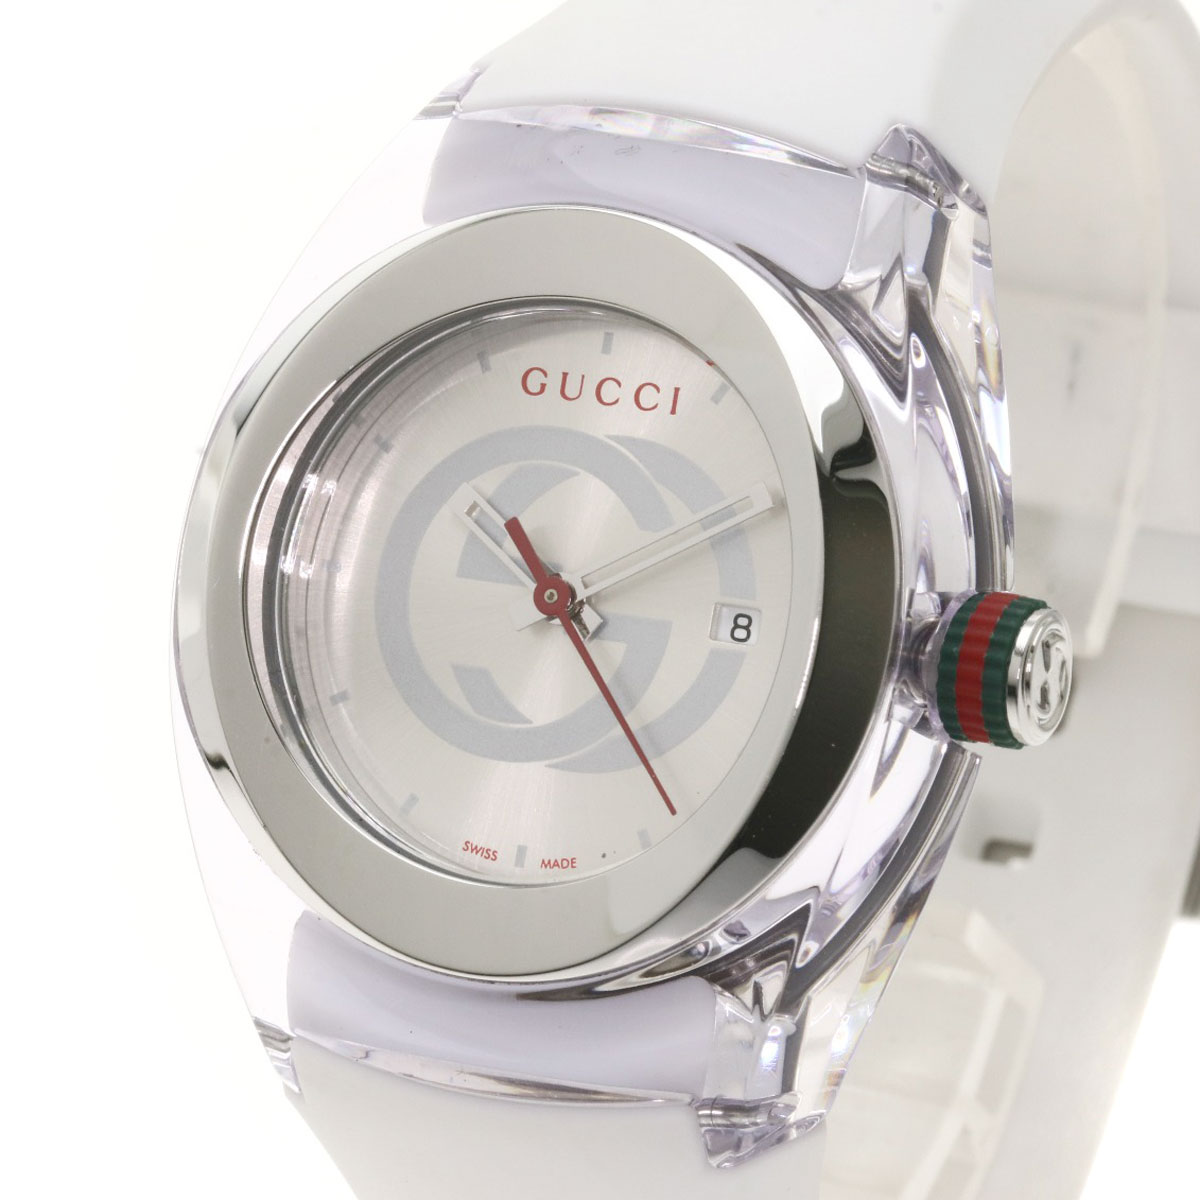 GUCCI SYNC Watches YA137302 Stainless Steel/Rubber Ladies | eBay